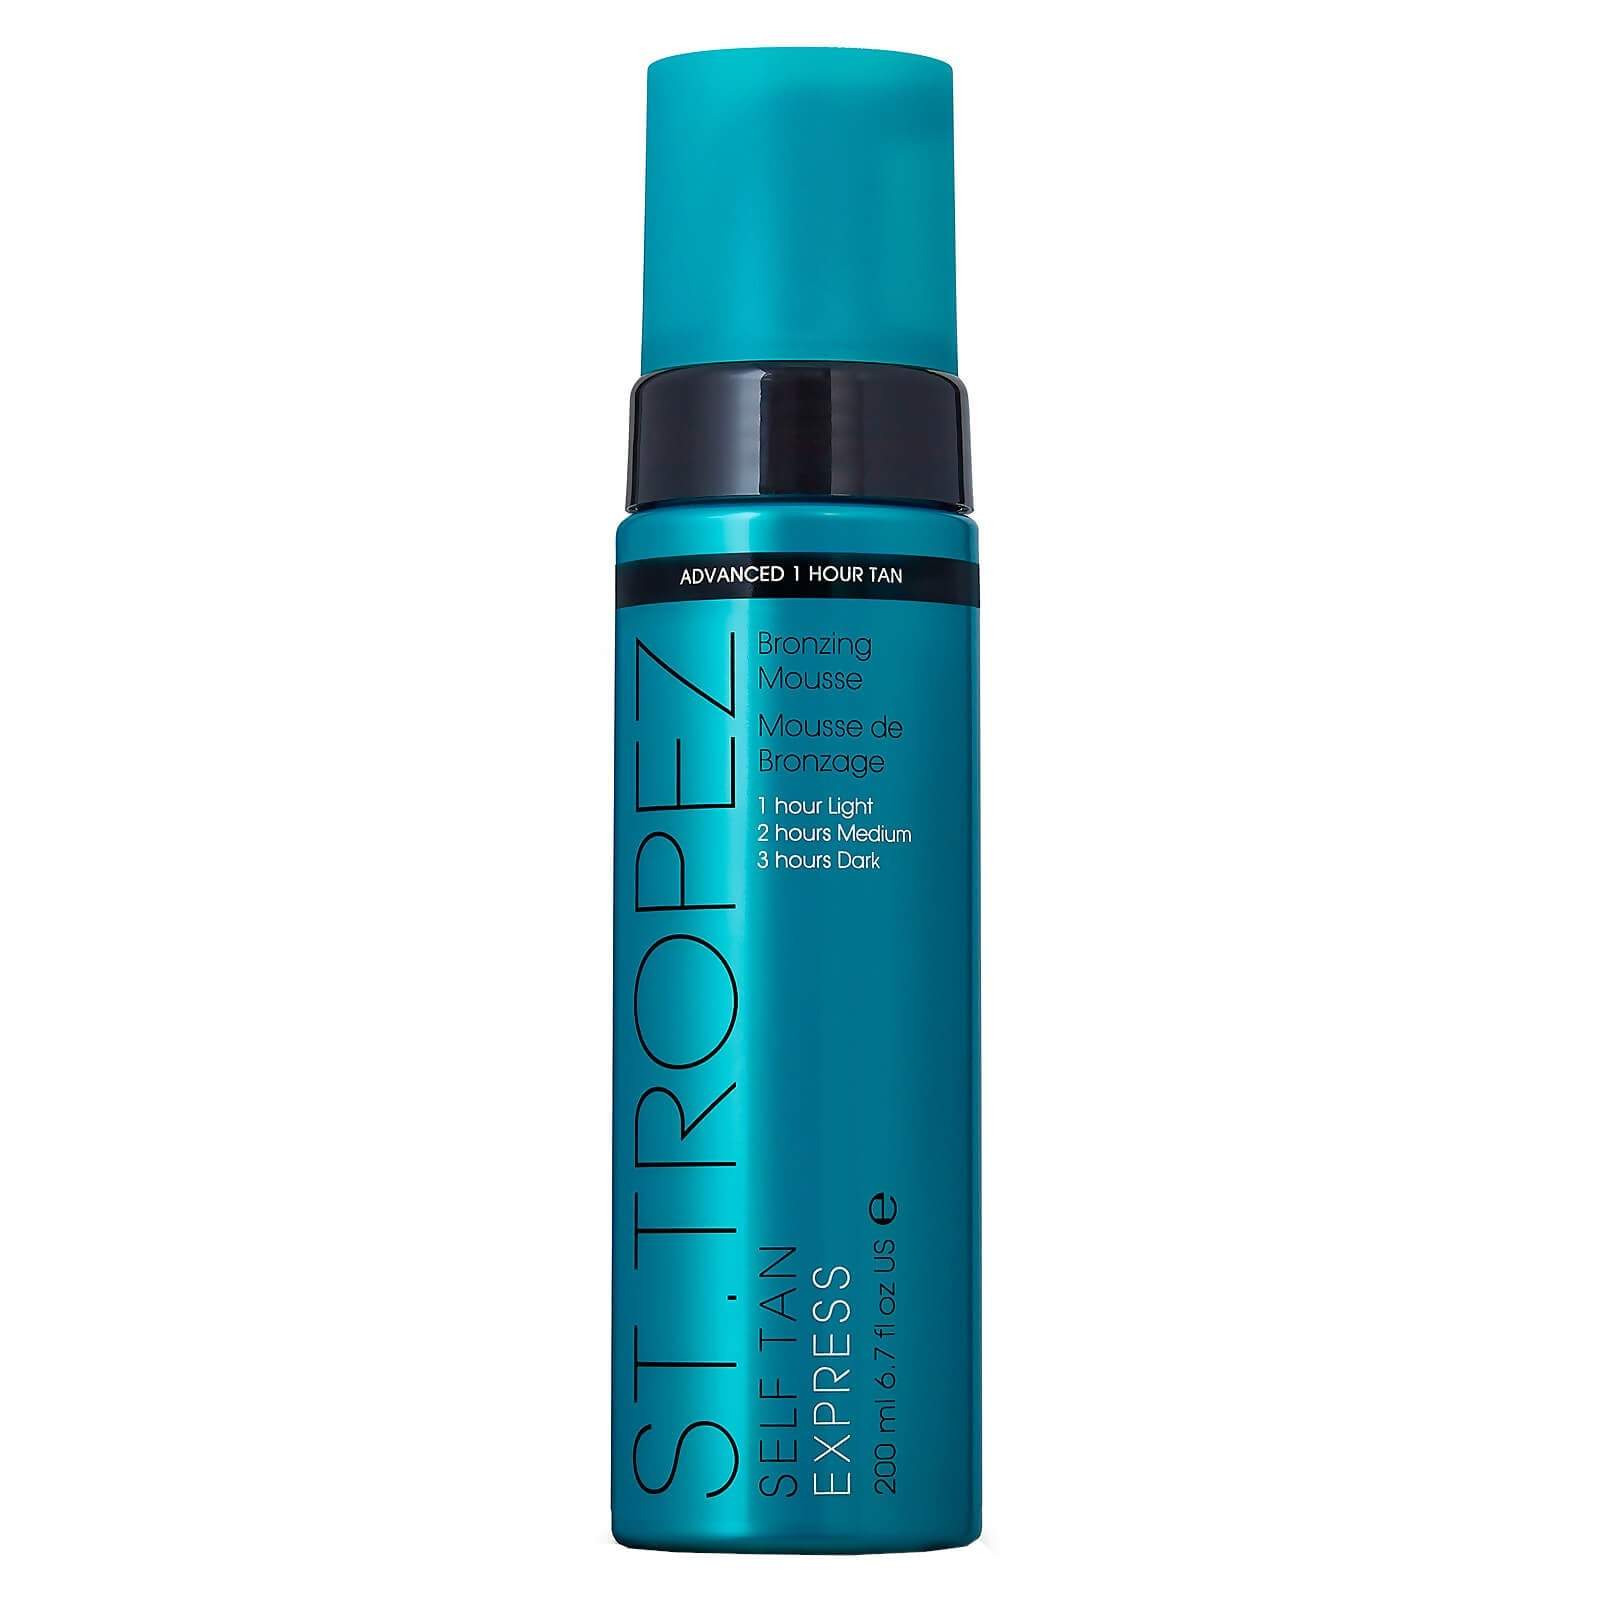 St. Tropez Self Tan Express Advanced Bronzing Mousse 6.7oz-St. Tropez-BB_Self-Tanners,Brand_St. Tropez,Collection_Bath and Body,Memorial Day Sale,St. Tropez_ Tanning Mousse's